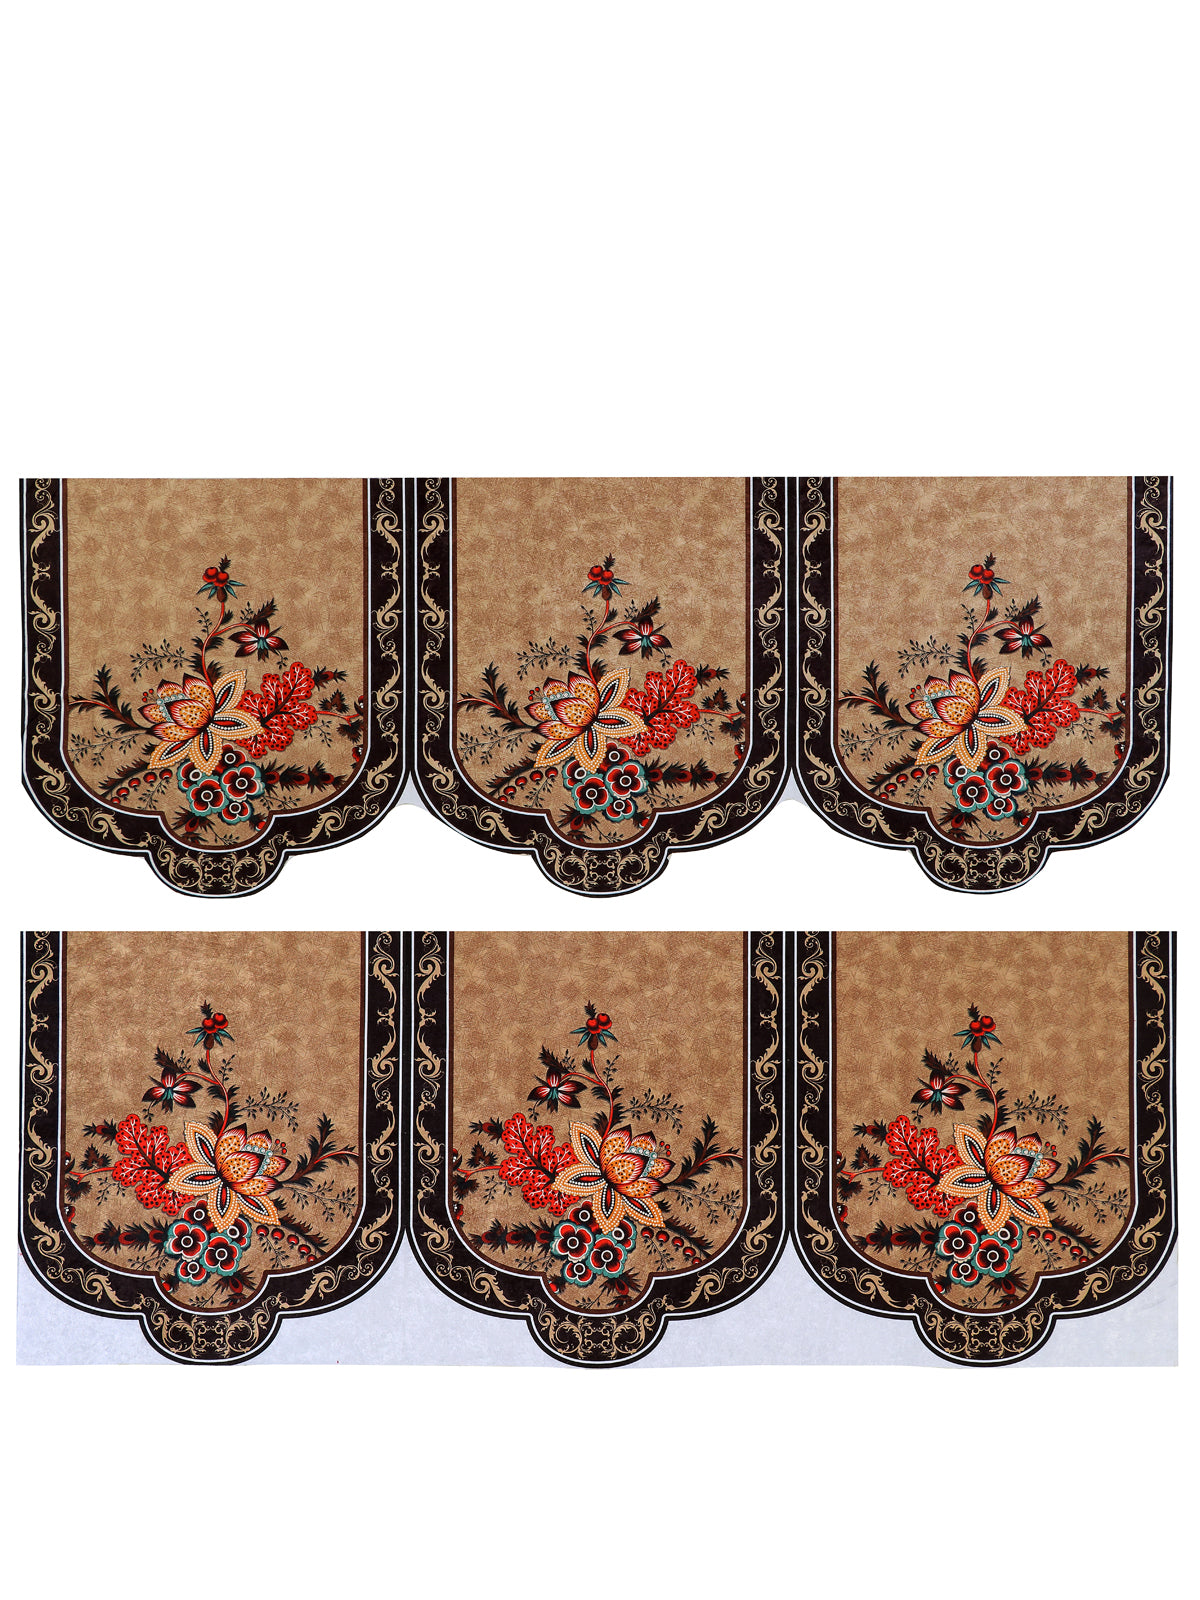 Brown & Maroon Floral Patterned 5 Seater Sofa Cover Set